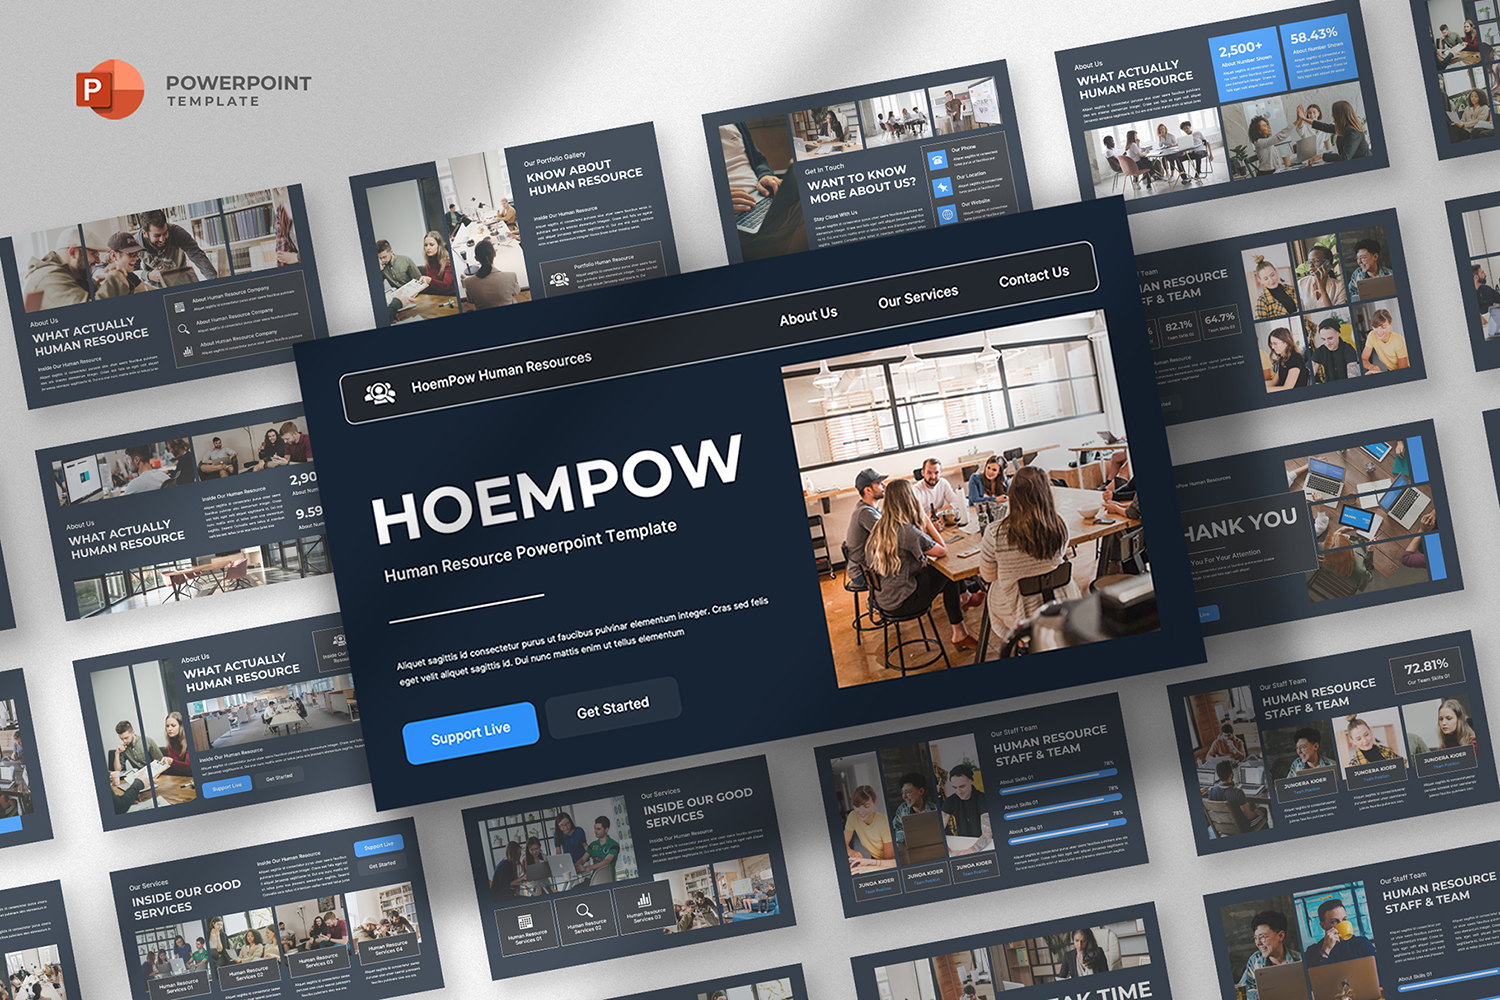 Hoempow - Human Resources Powerpoint Template